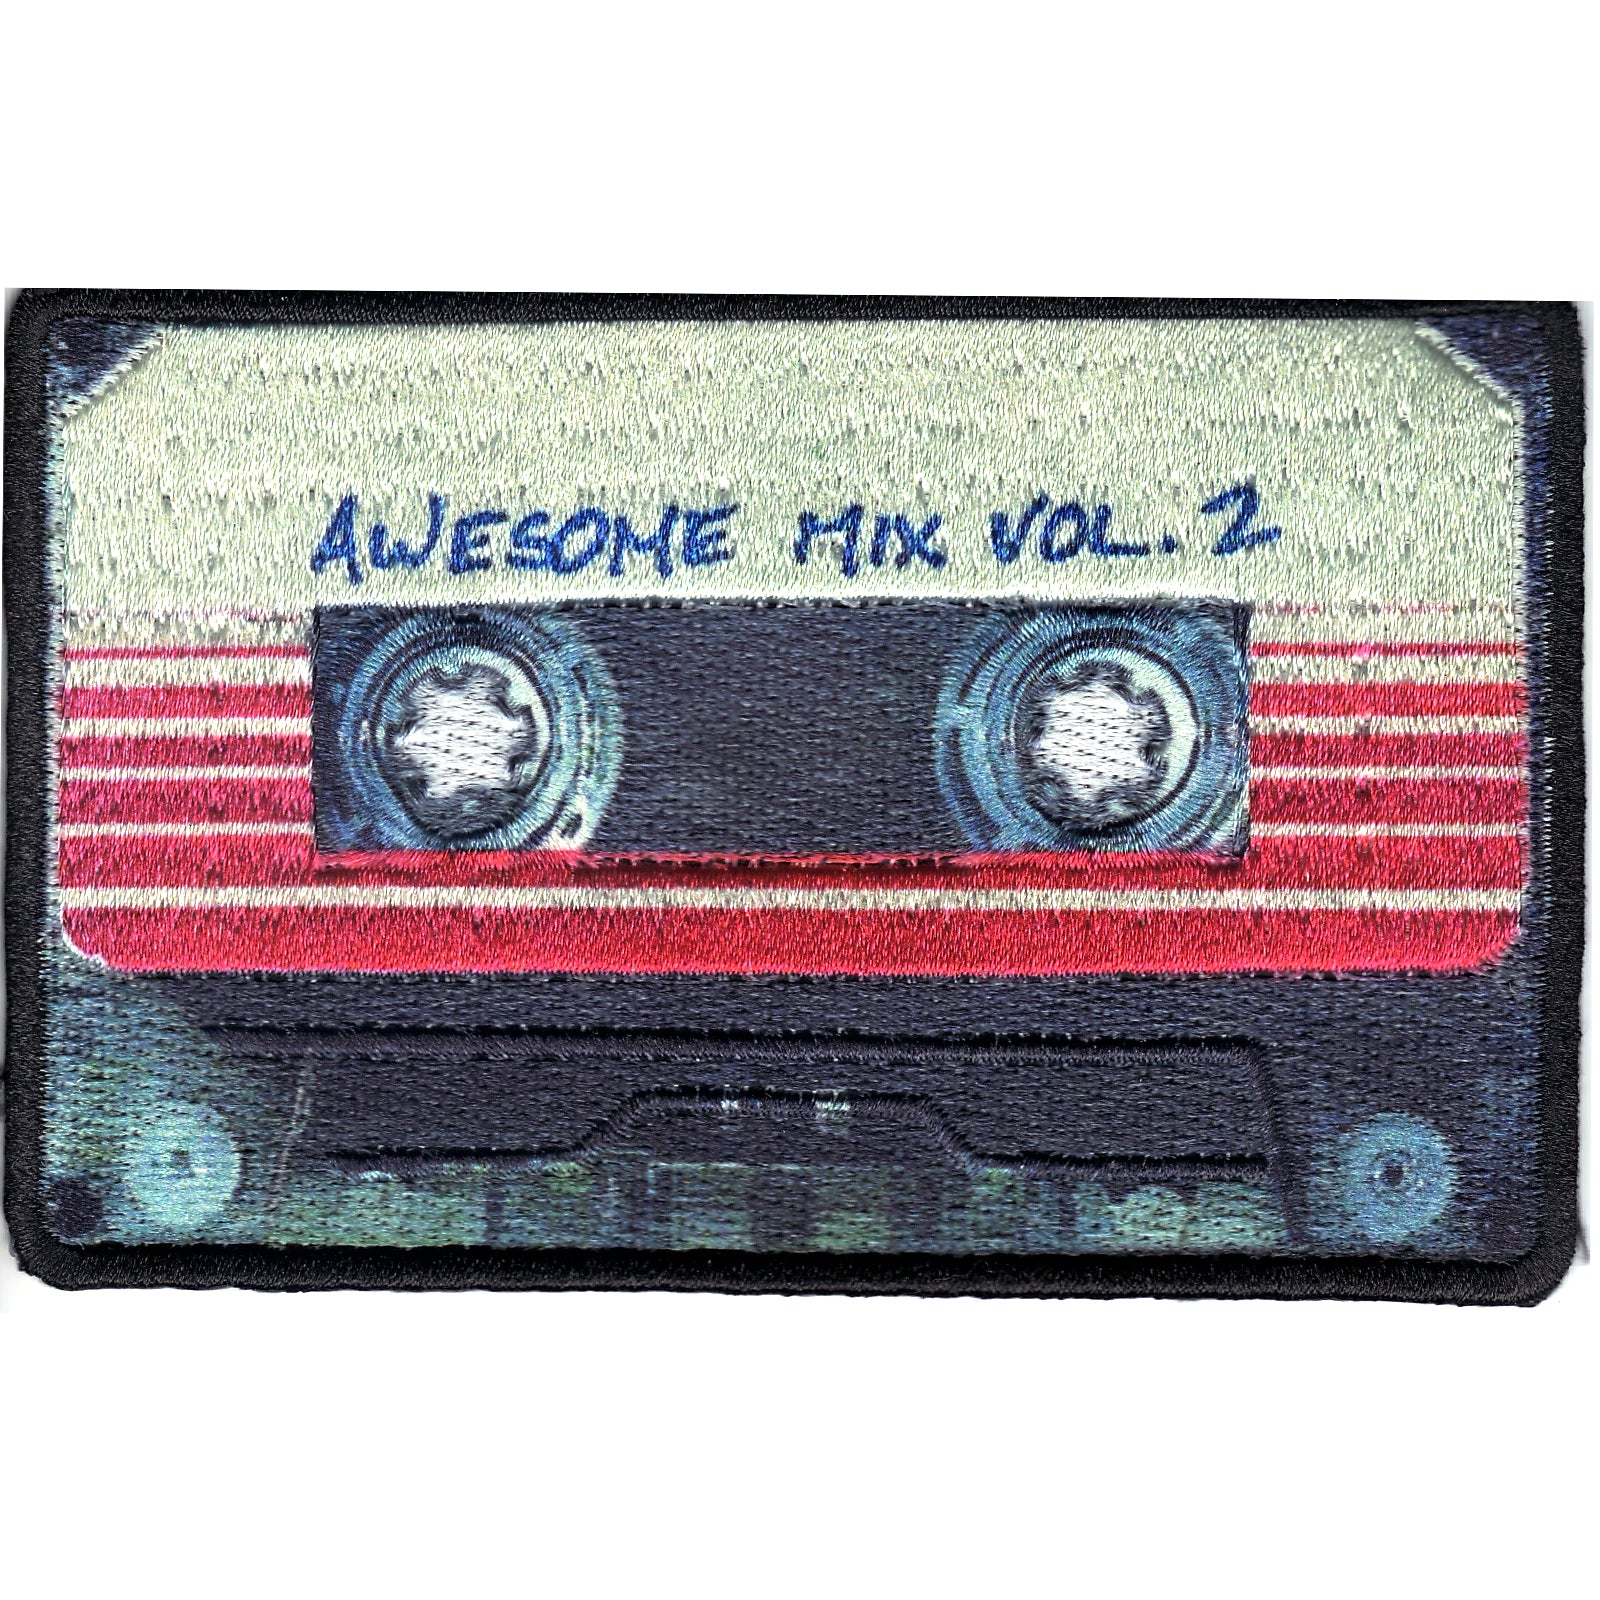 Guardians of the Galaxy Awesome Mix Tape Iron on Applique Patch 